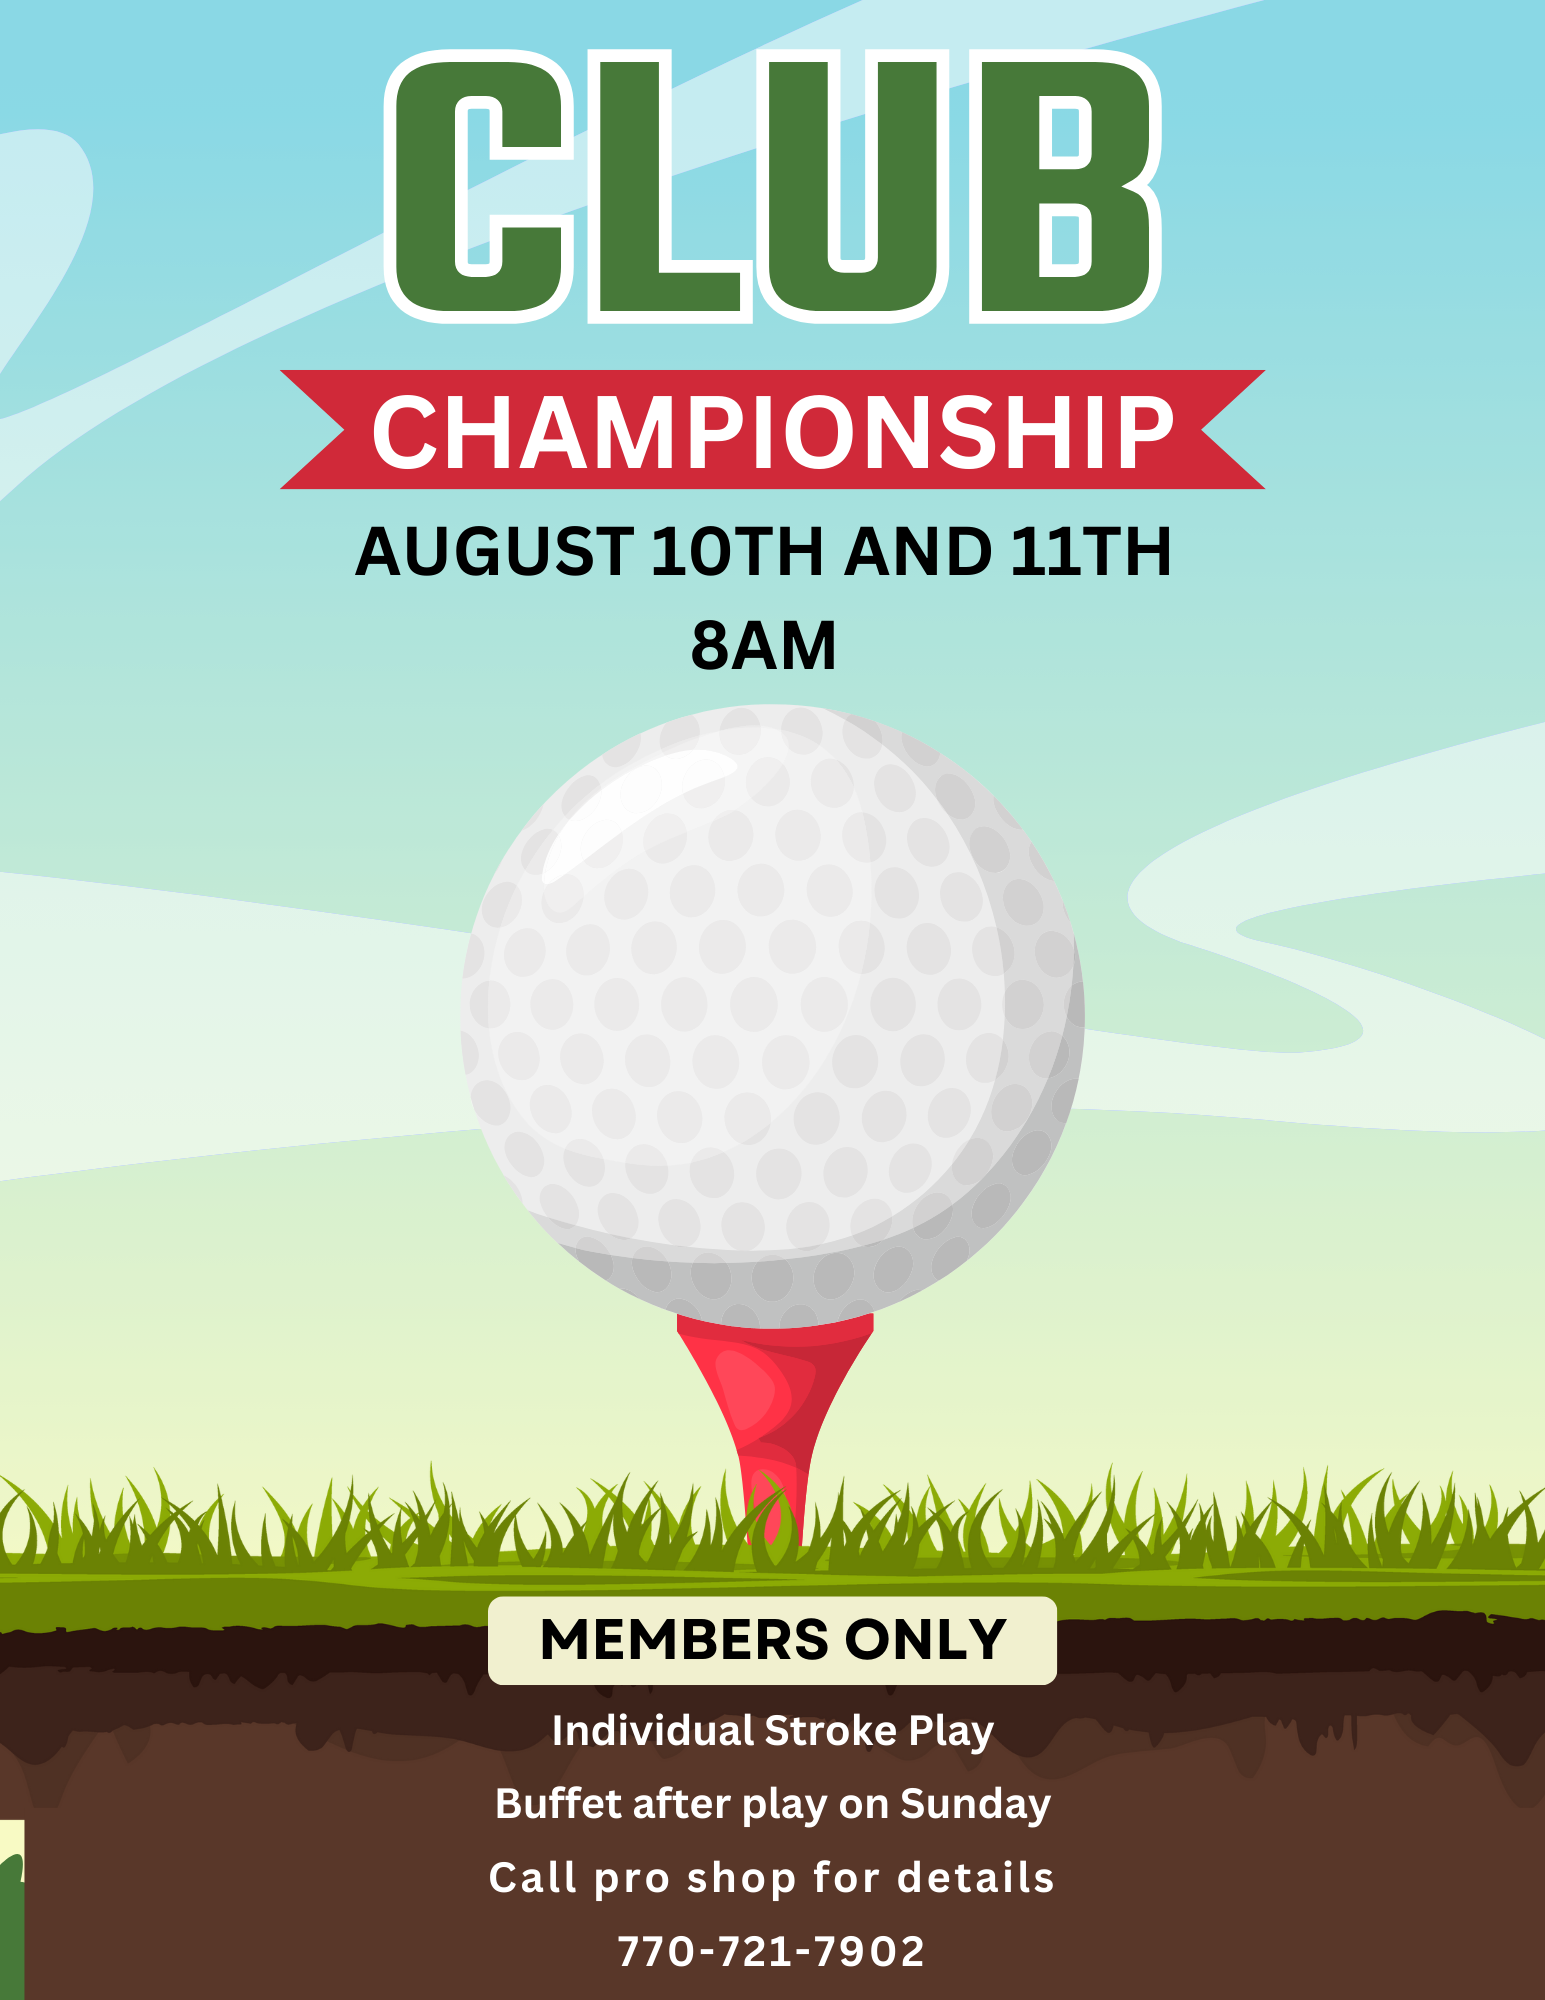 Club Championship August 10th and 11th